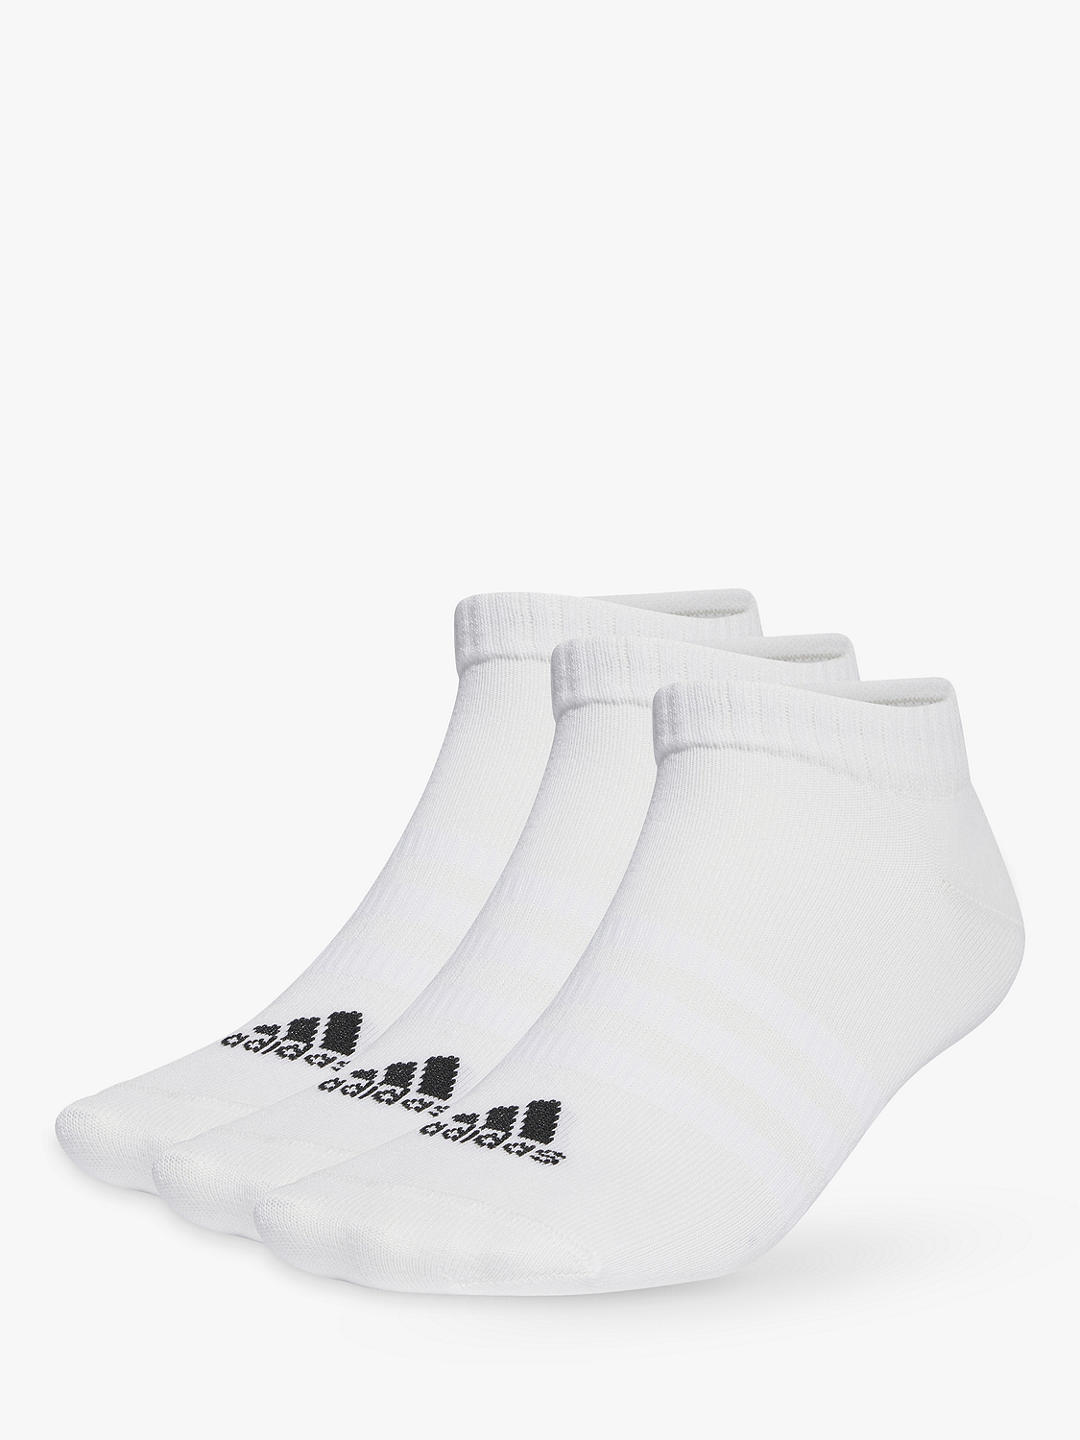 adidas Thin and Light Low-Cut Socks, Pack of 3, White/Black